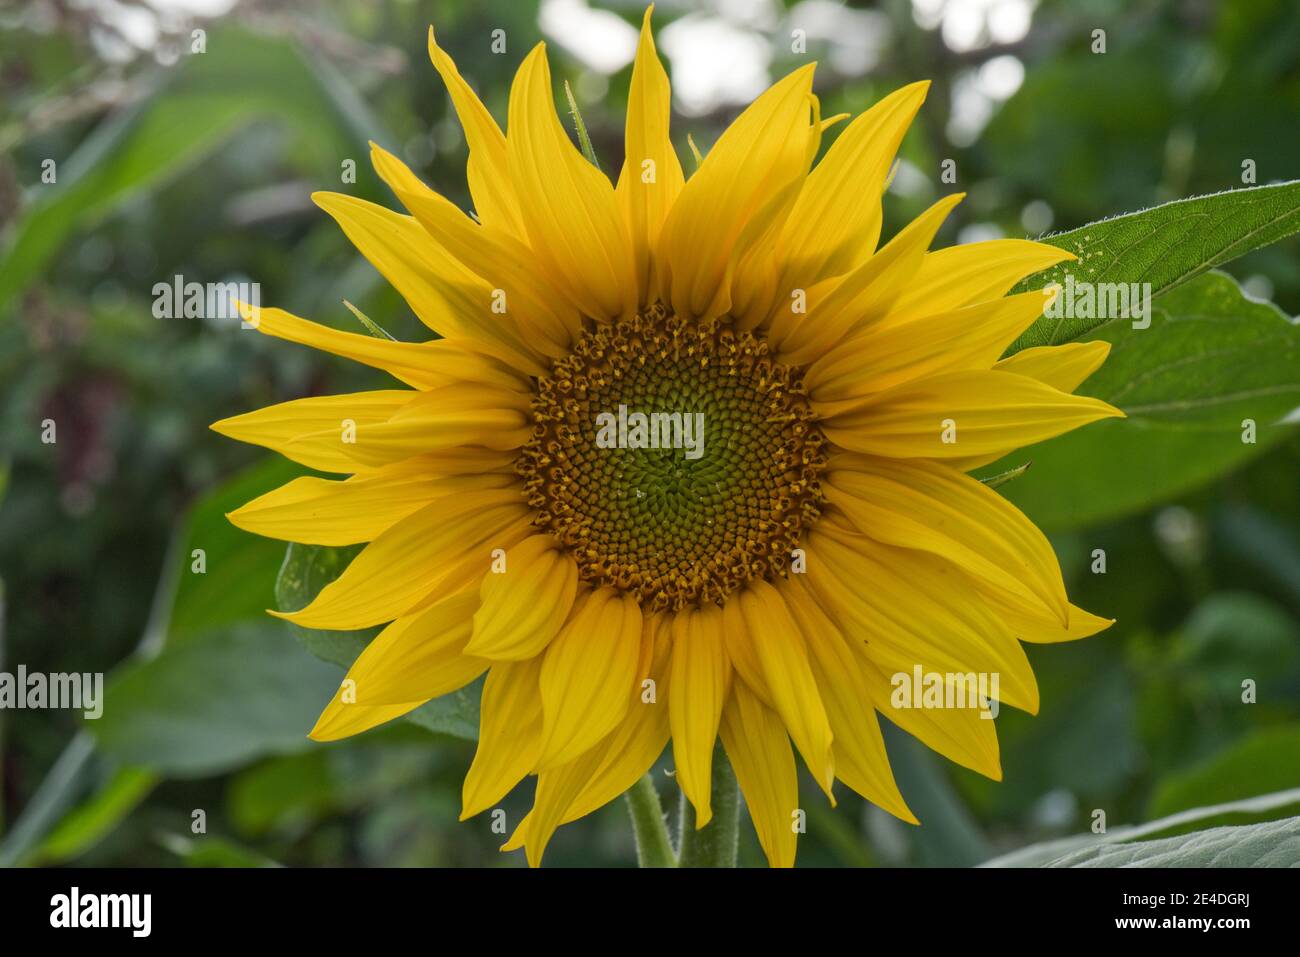 Sunflower (Helianthus annuus) flower or pseudoanthium consisting of petal-like sterile ray flowers and inner disc flowers that develop into seeds. Stock Photo